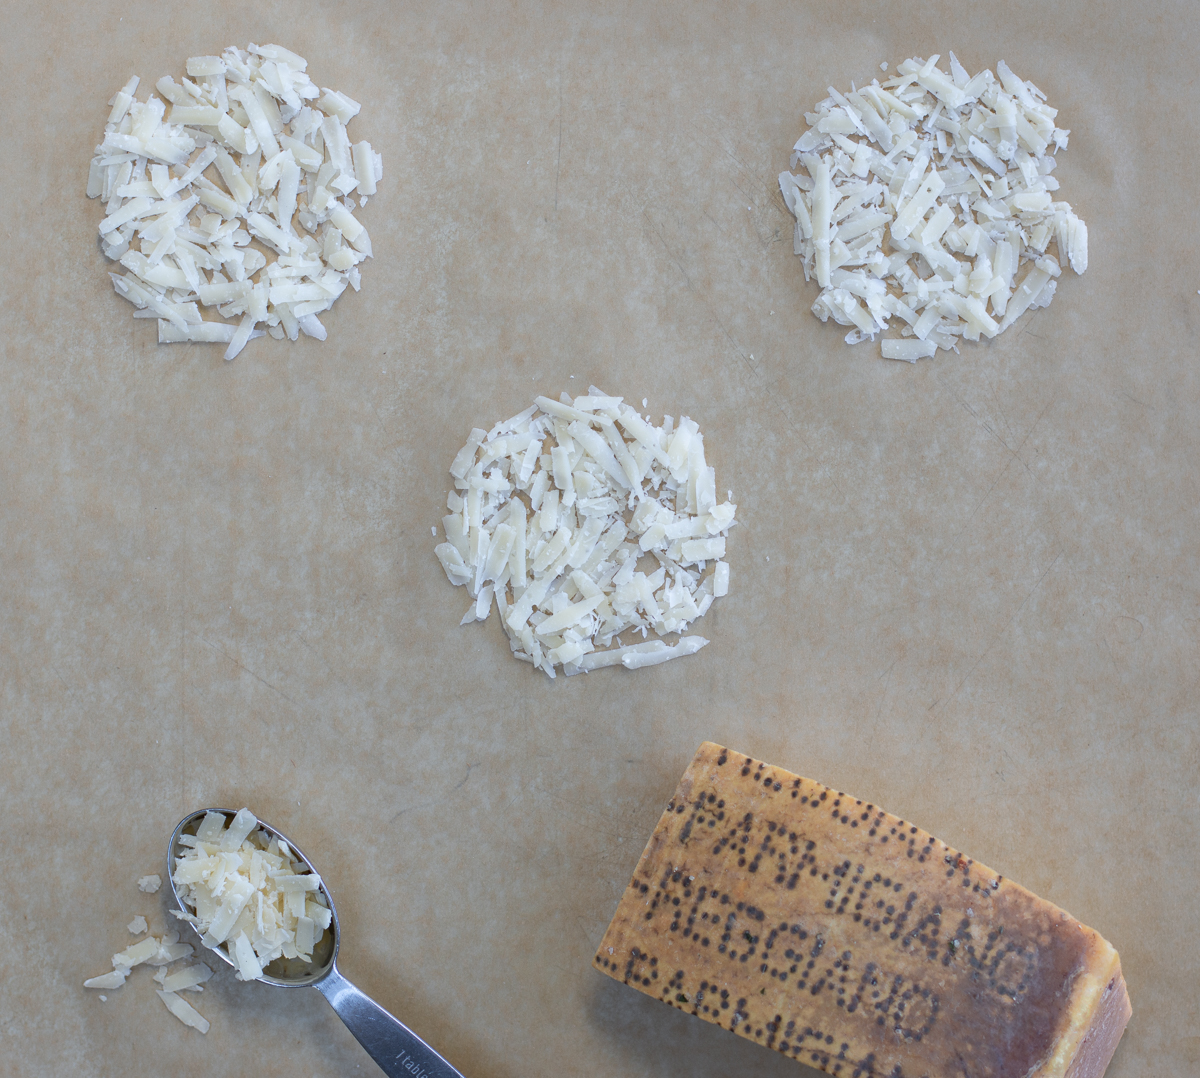 making Parmesan Crisps - adding cheese to parchment paper in little rounds